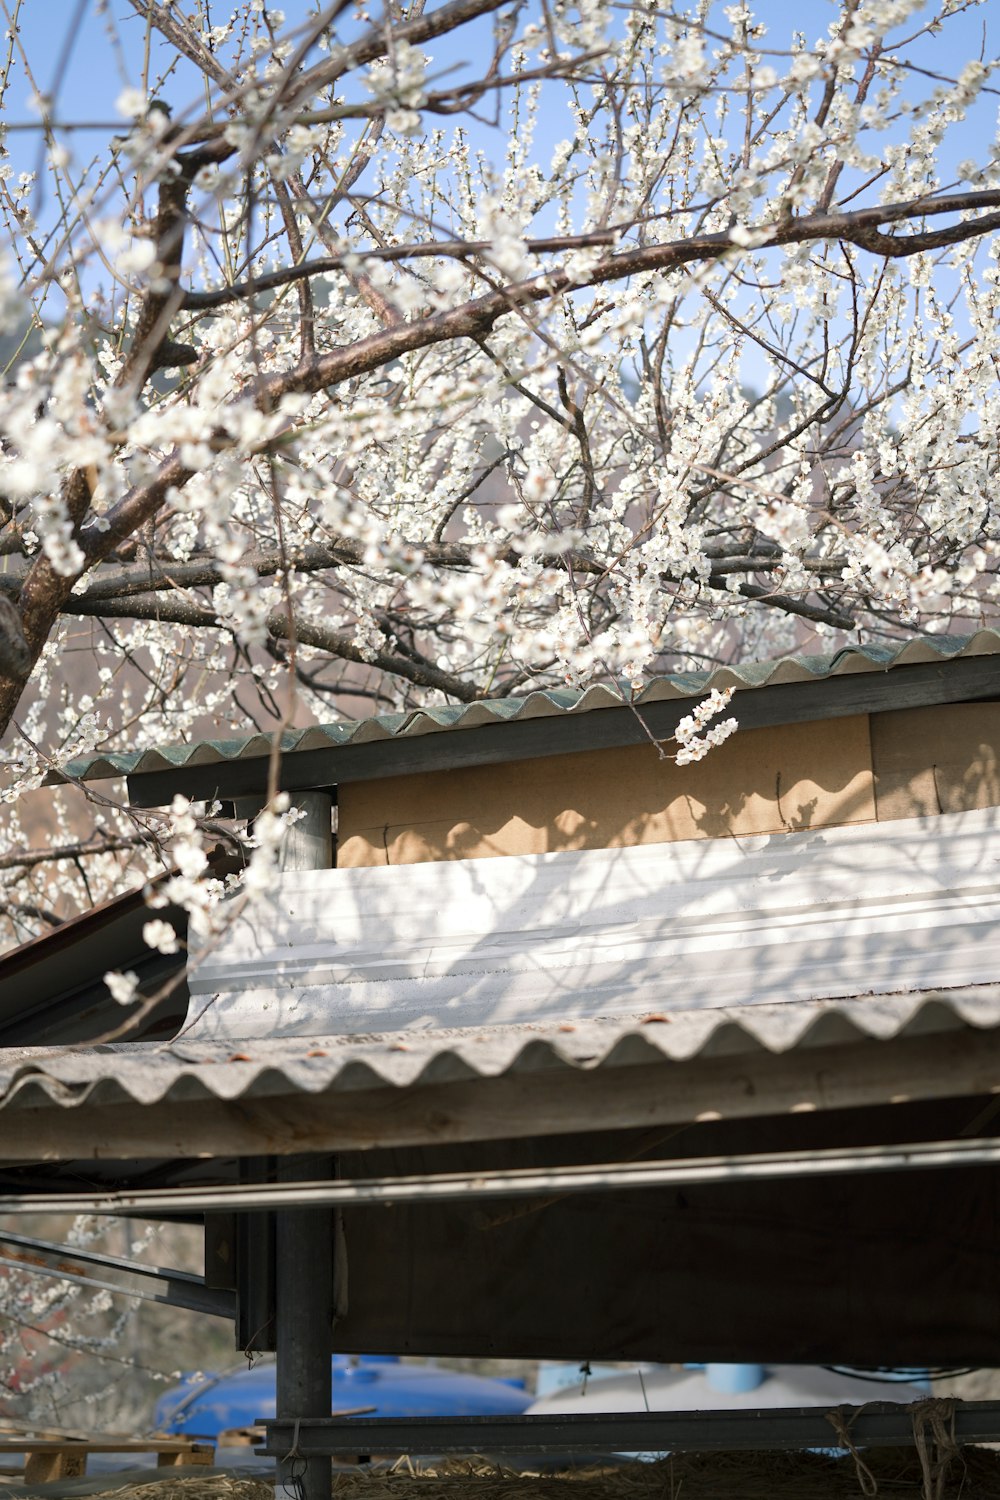 a bird perched on a roof next to a tree